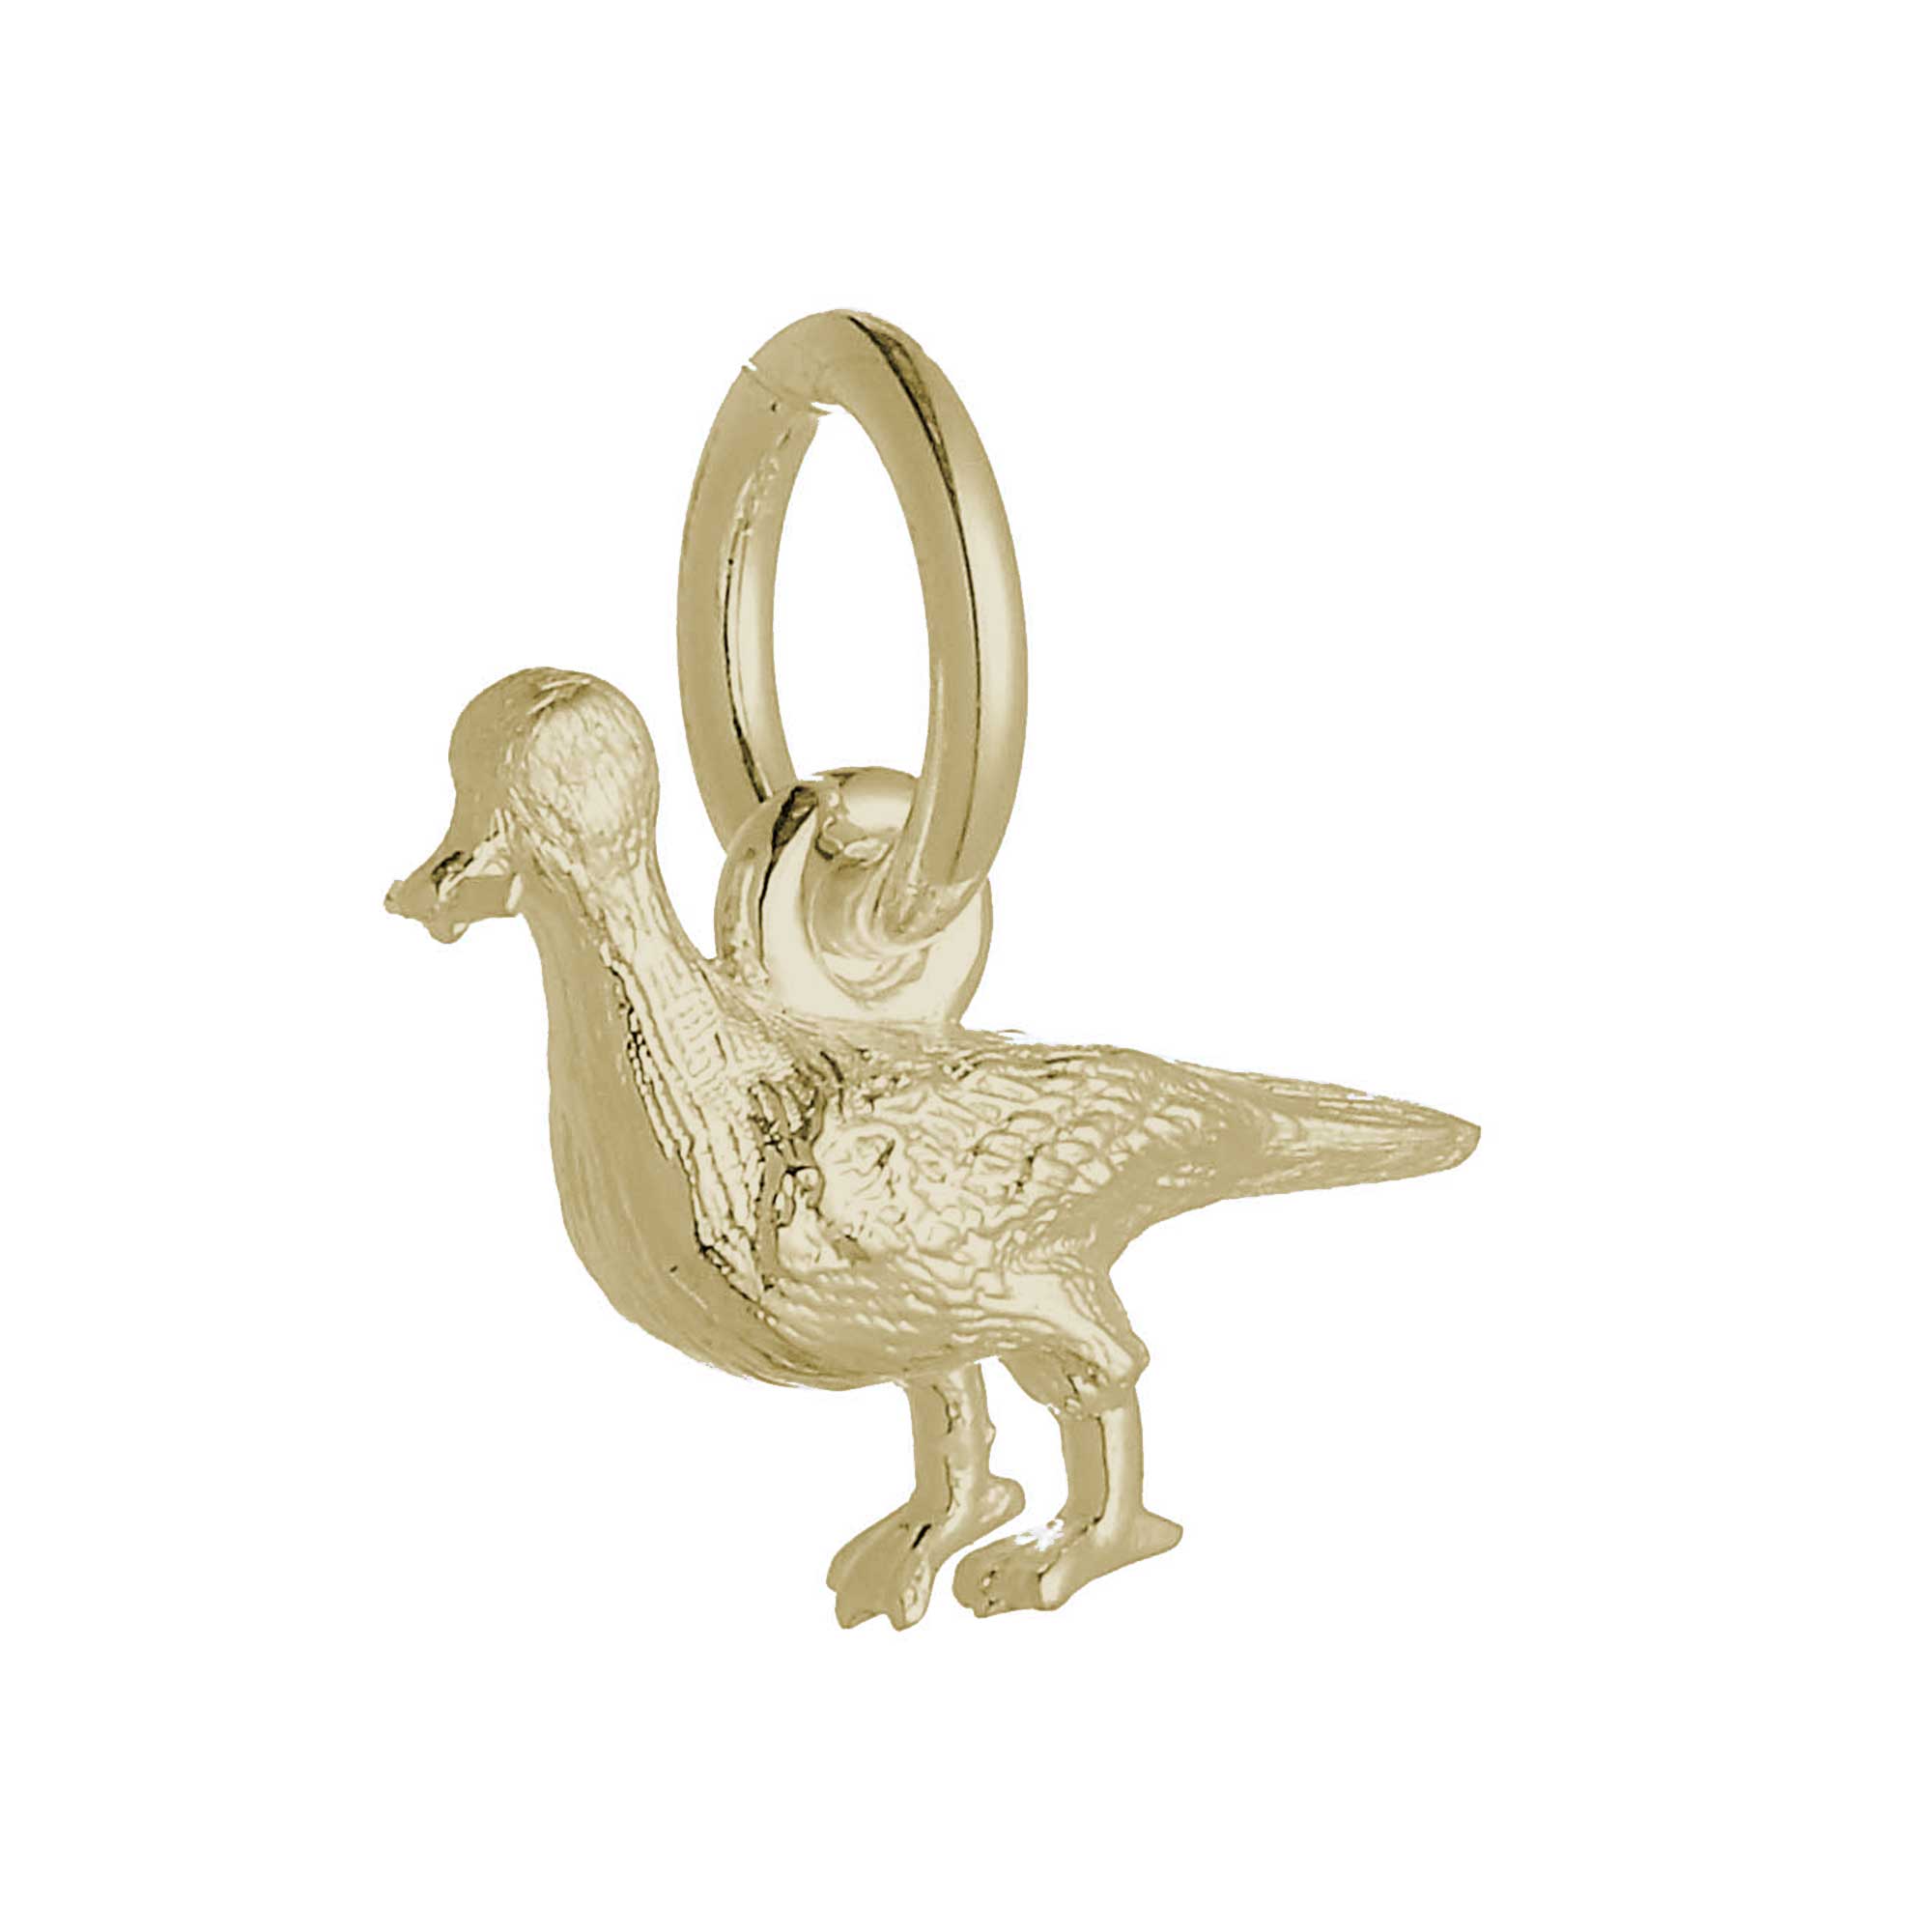 slid gold seagull charm made in Brighton UK